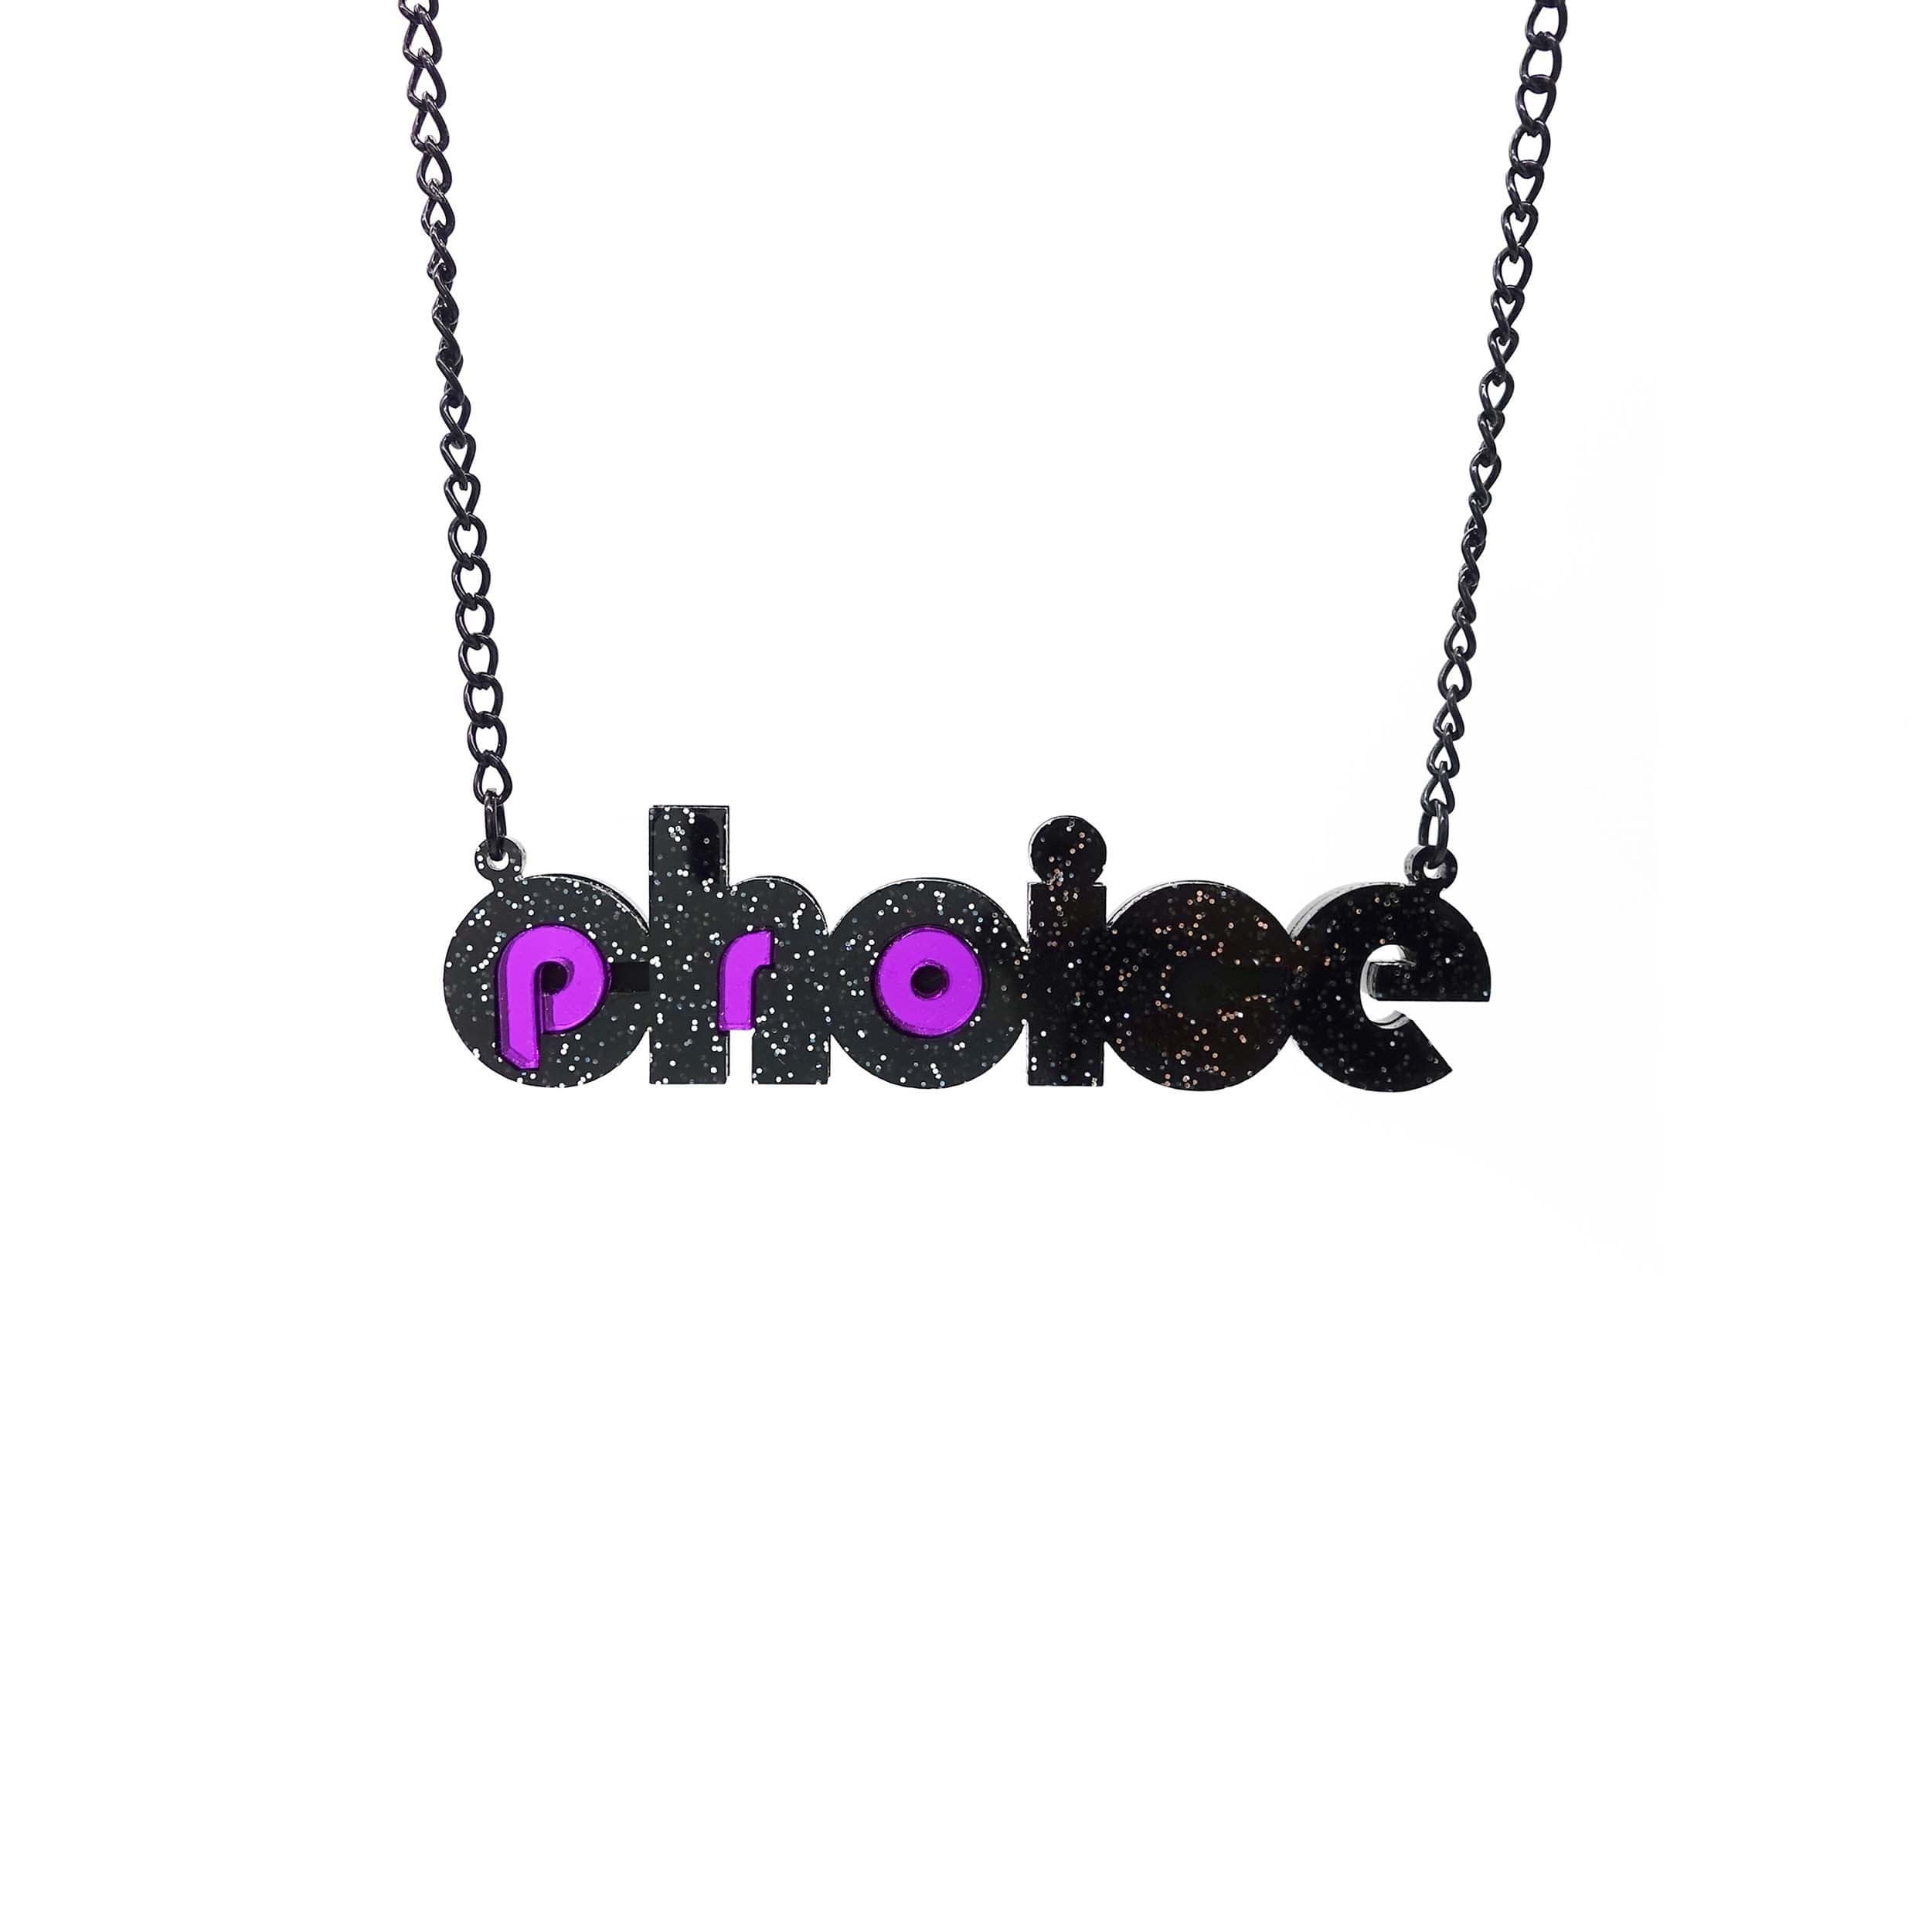 Black glitter and purple mirror Pro-choice necklace, shown hanging on black chain, designed by Sarah Day for Wear and Resist. £2 goes to Alliance for Choice who campaign  for Free, Safe and Legal abortions for anyone who needs them. 